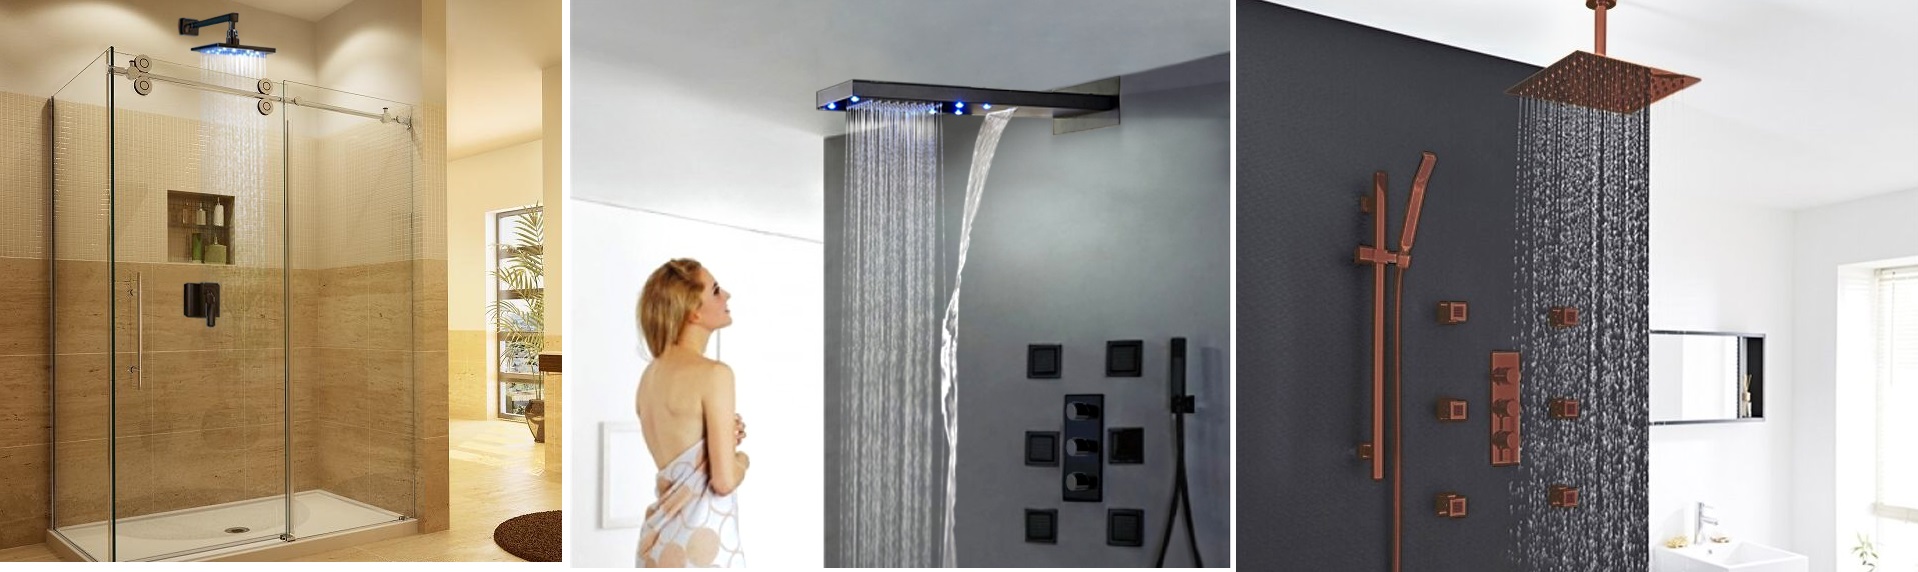 Oil Rubbed Bronze shower system